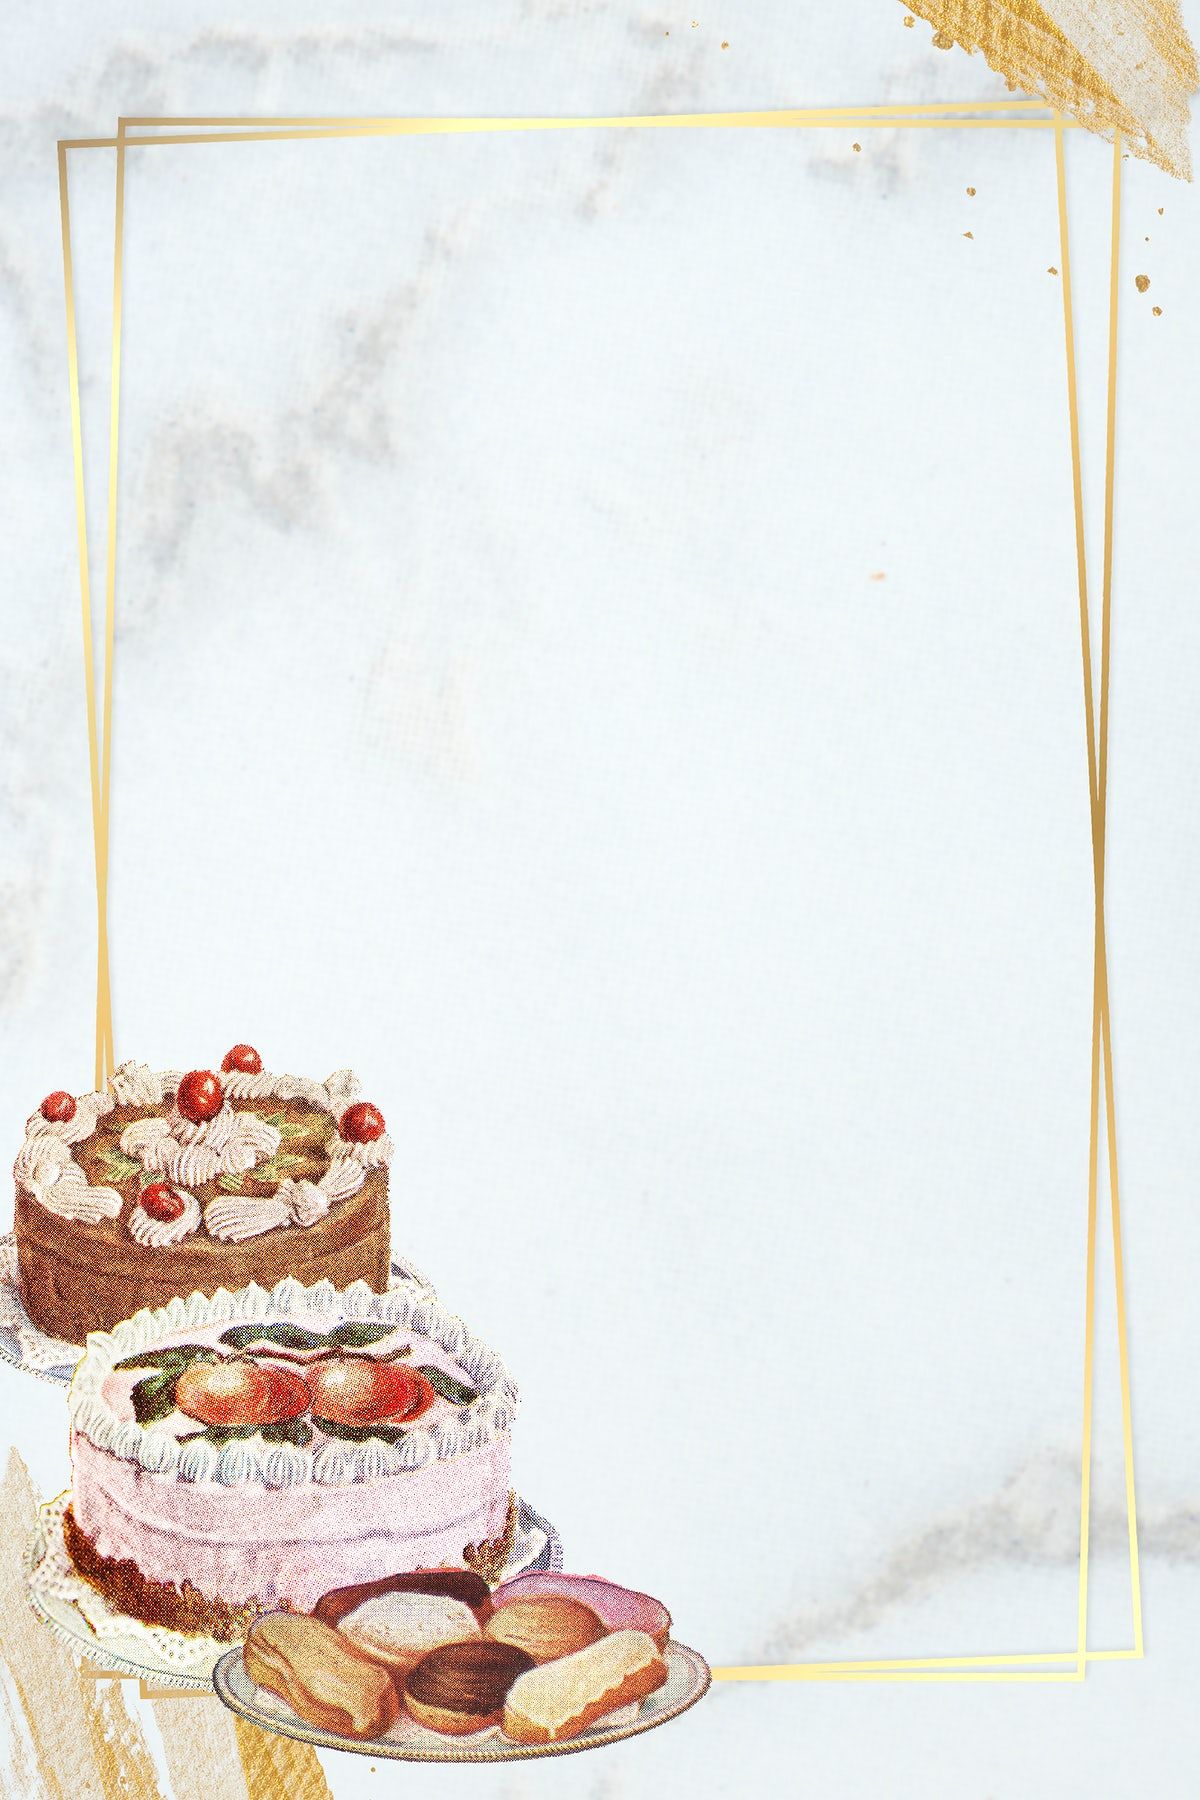 Premium Illustration Of Gold Frame With Cakes On Marble